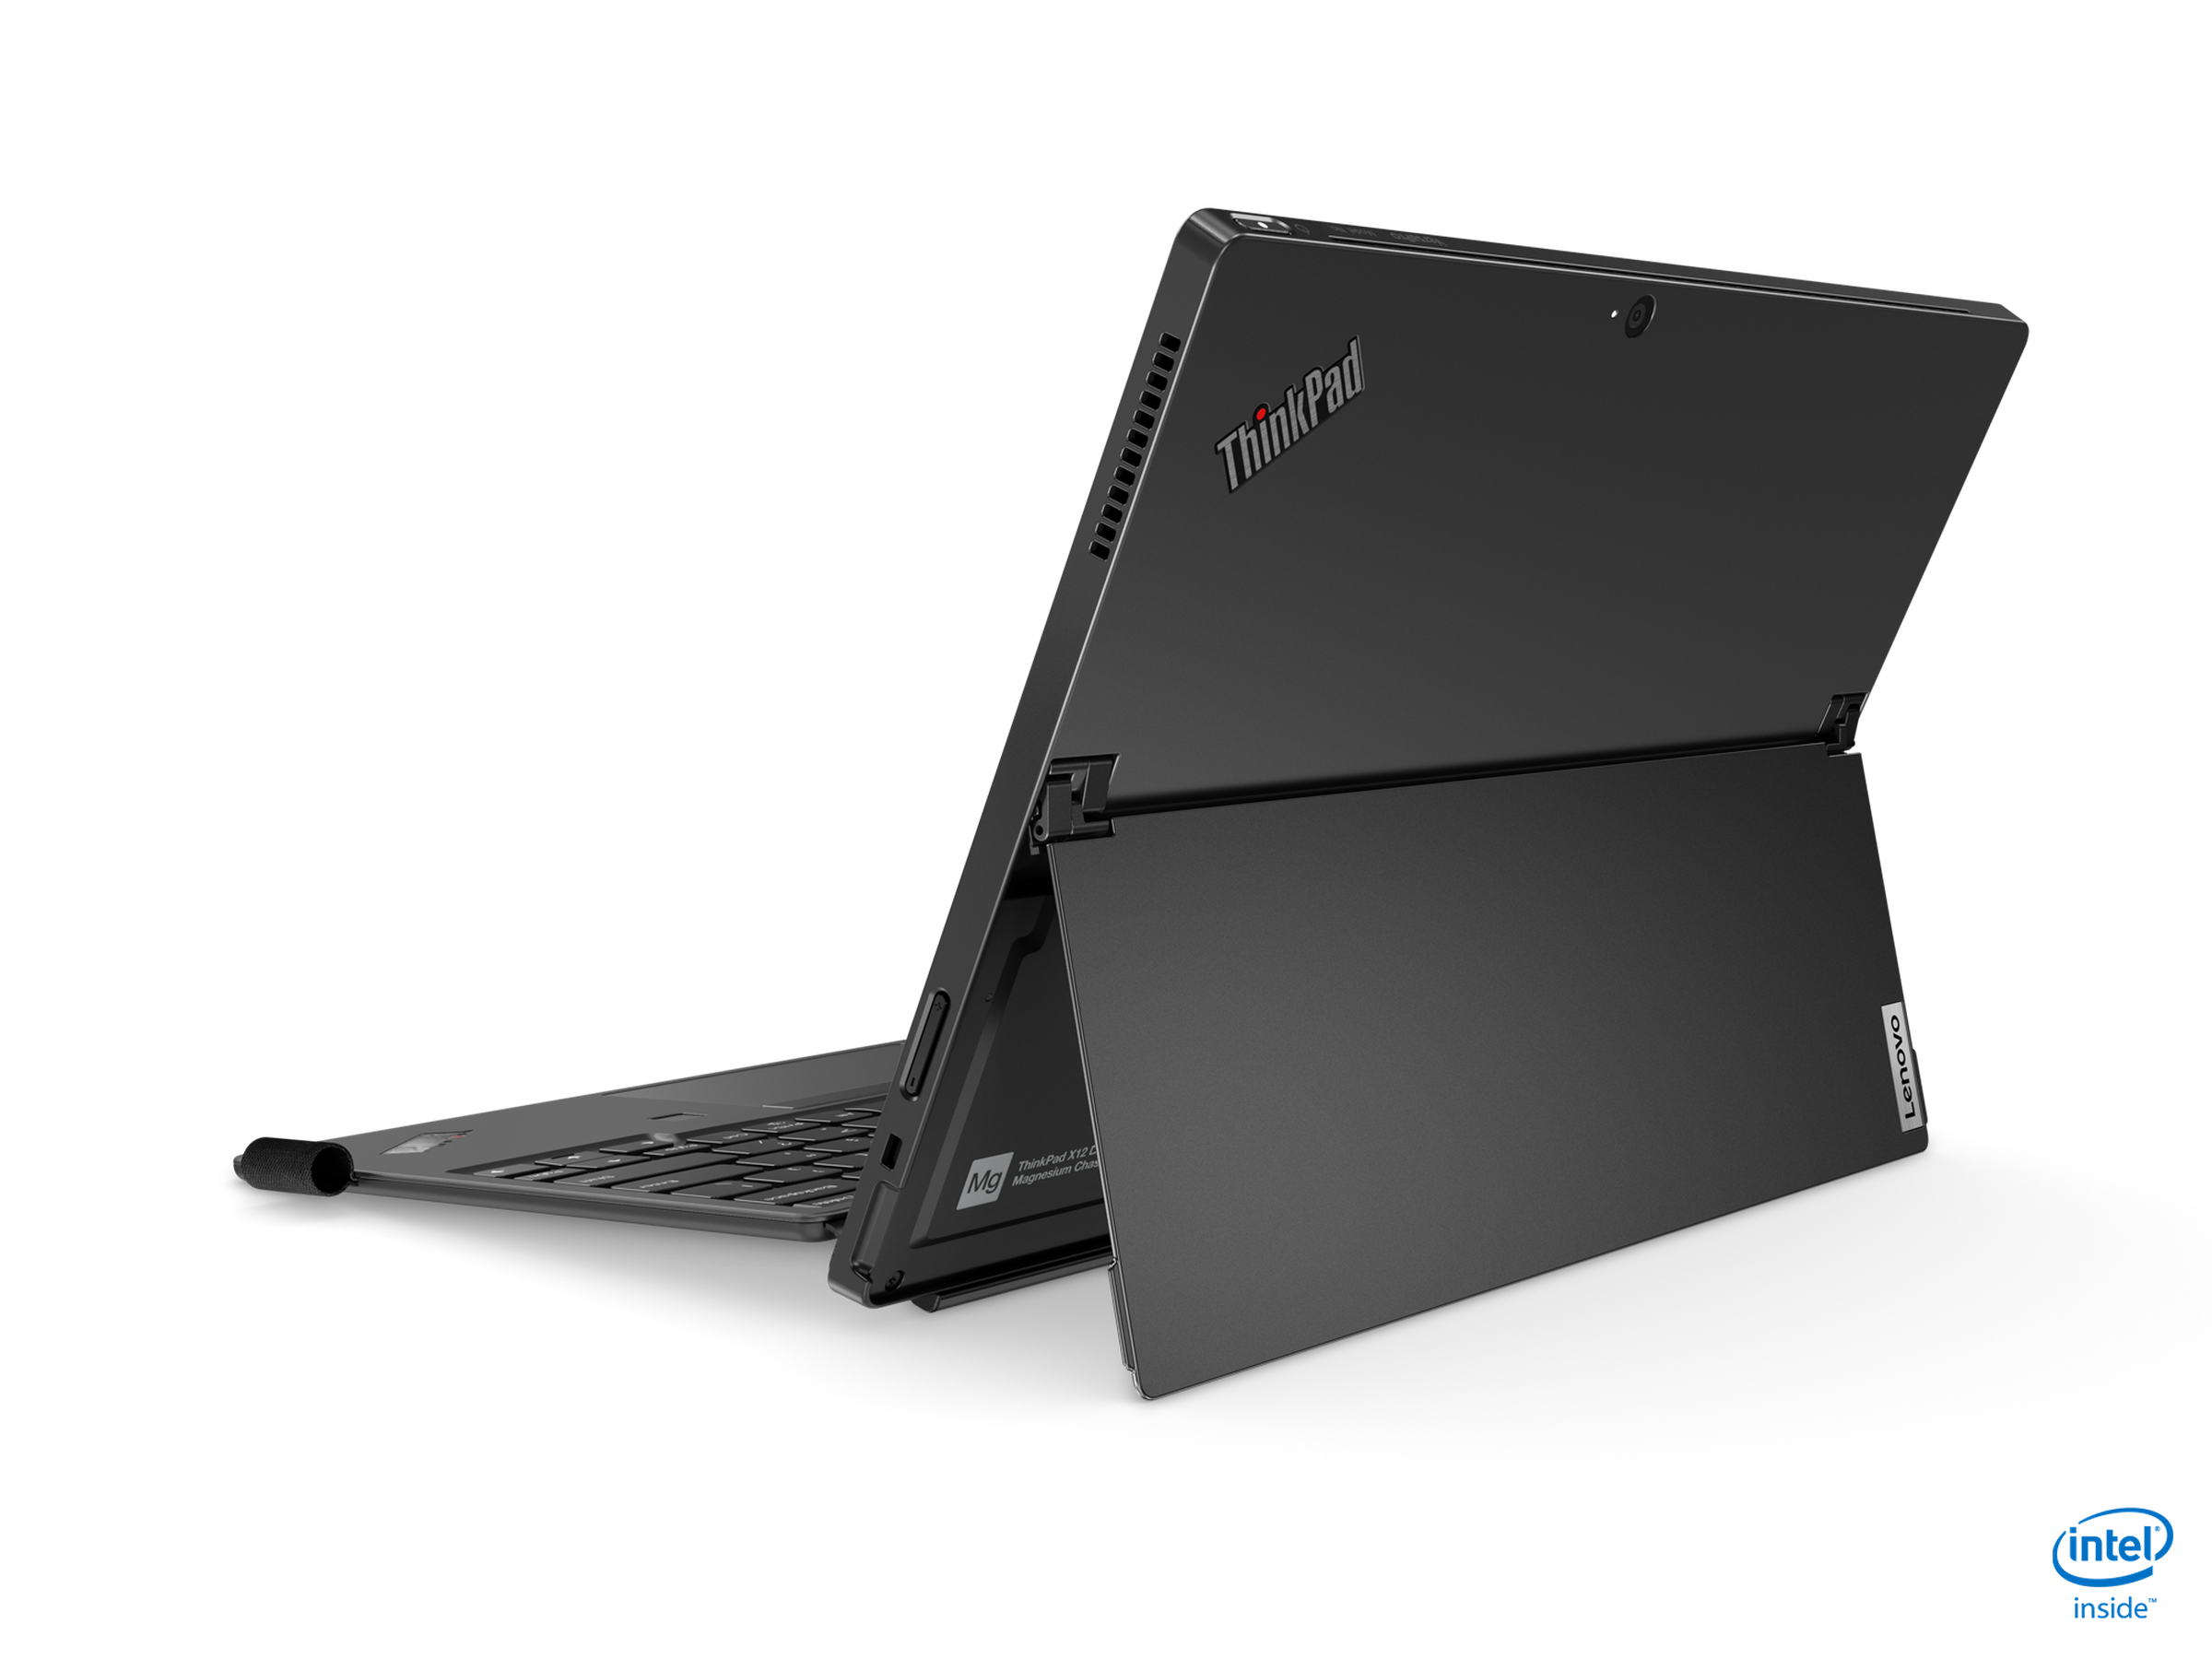 The ThinkPad X12 Detatchable in laptop mode, seen from the back with the kickstand unfolded.